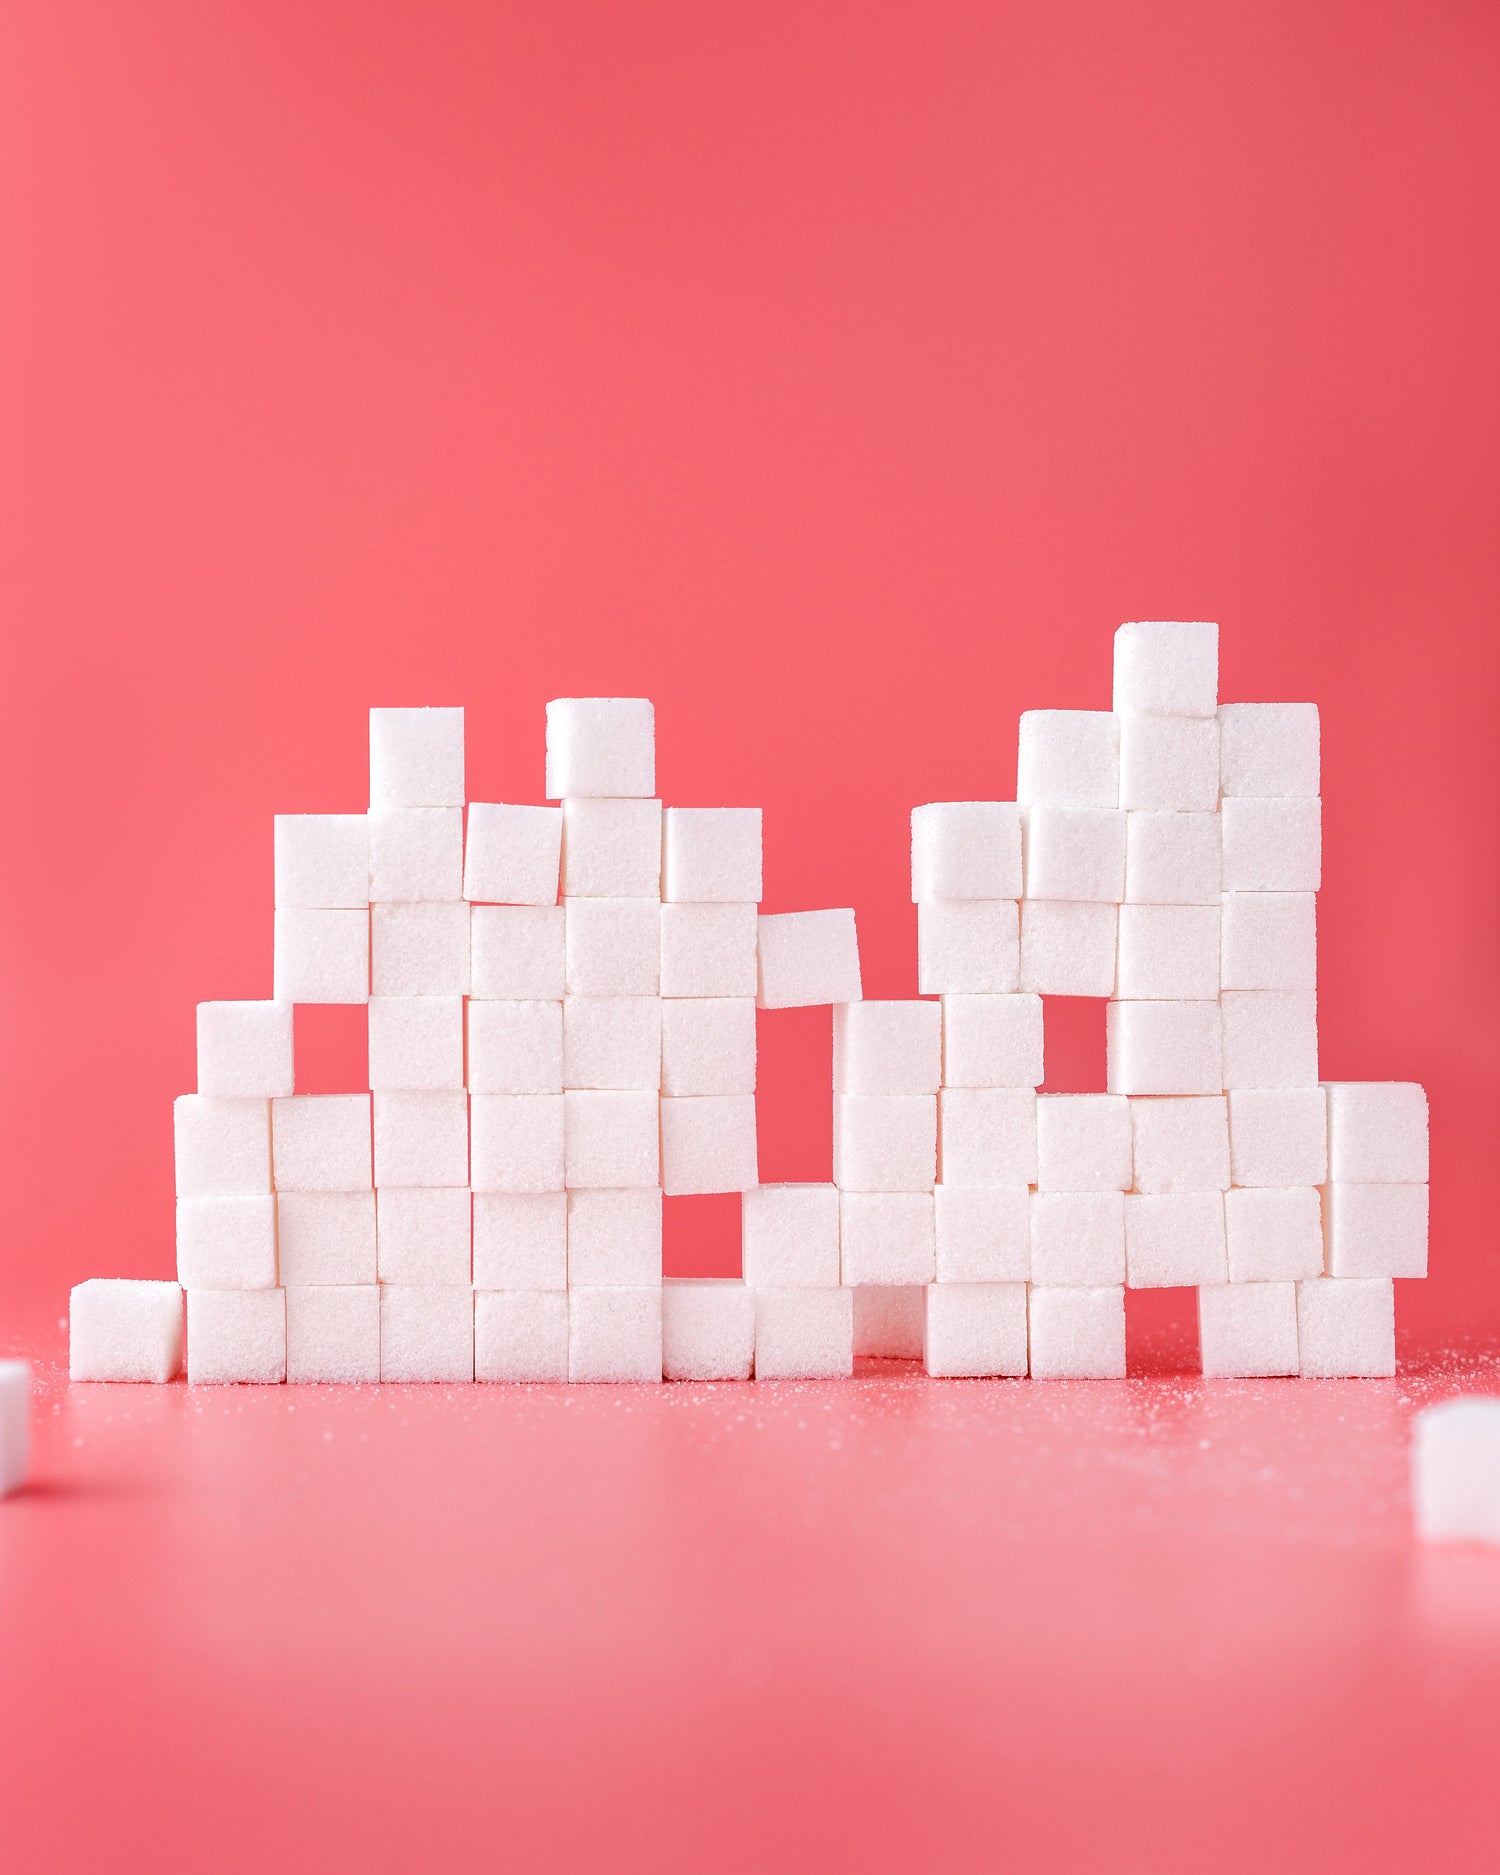 Let's Talk About SUGAR and Alternatives